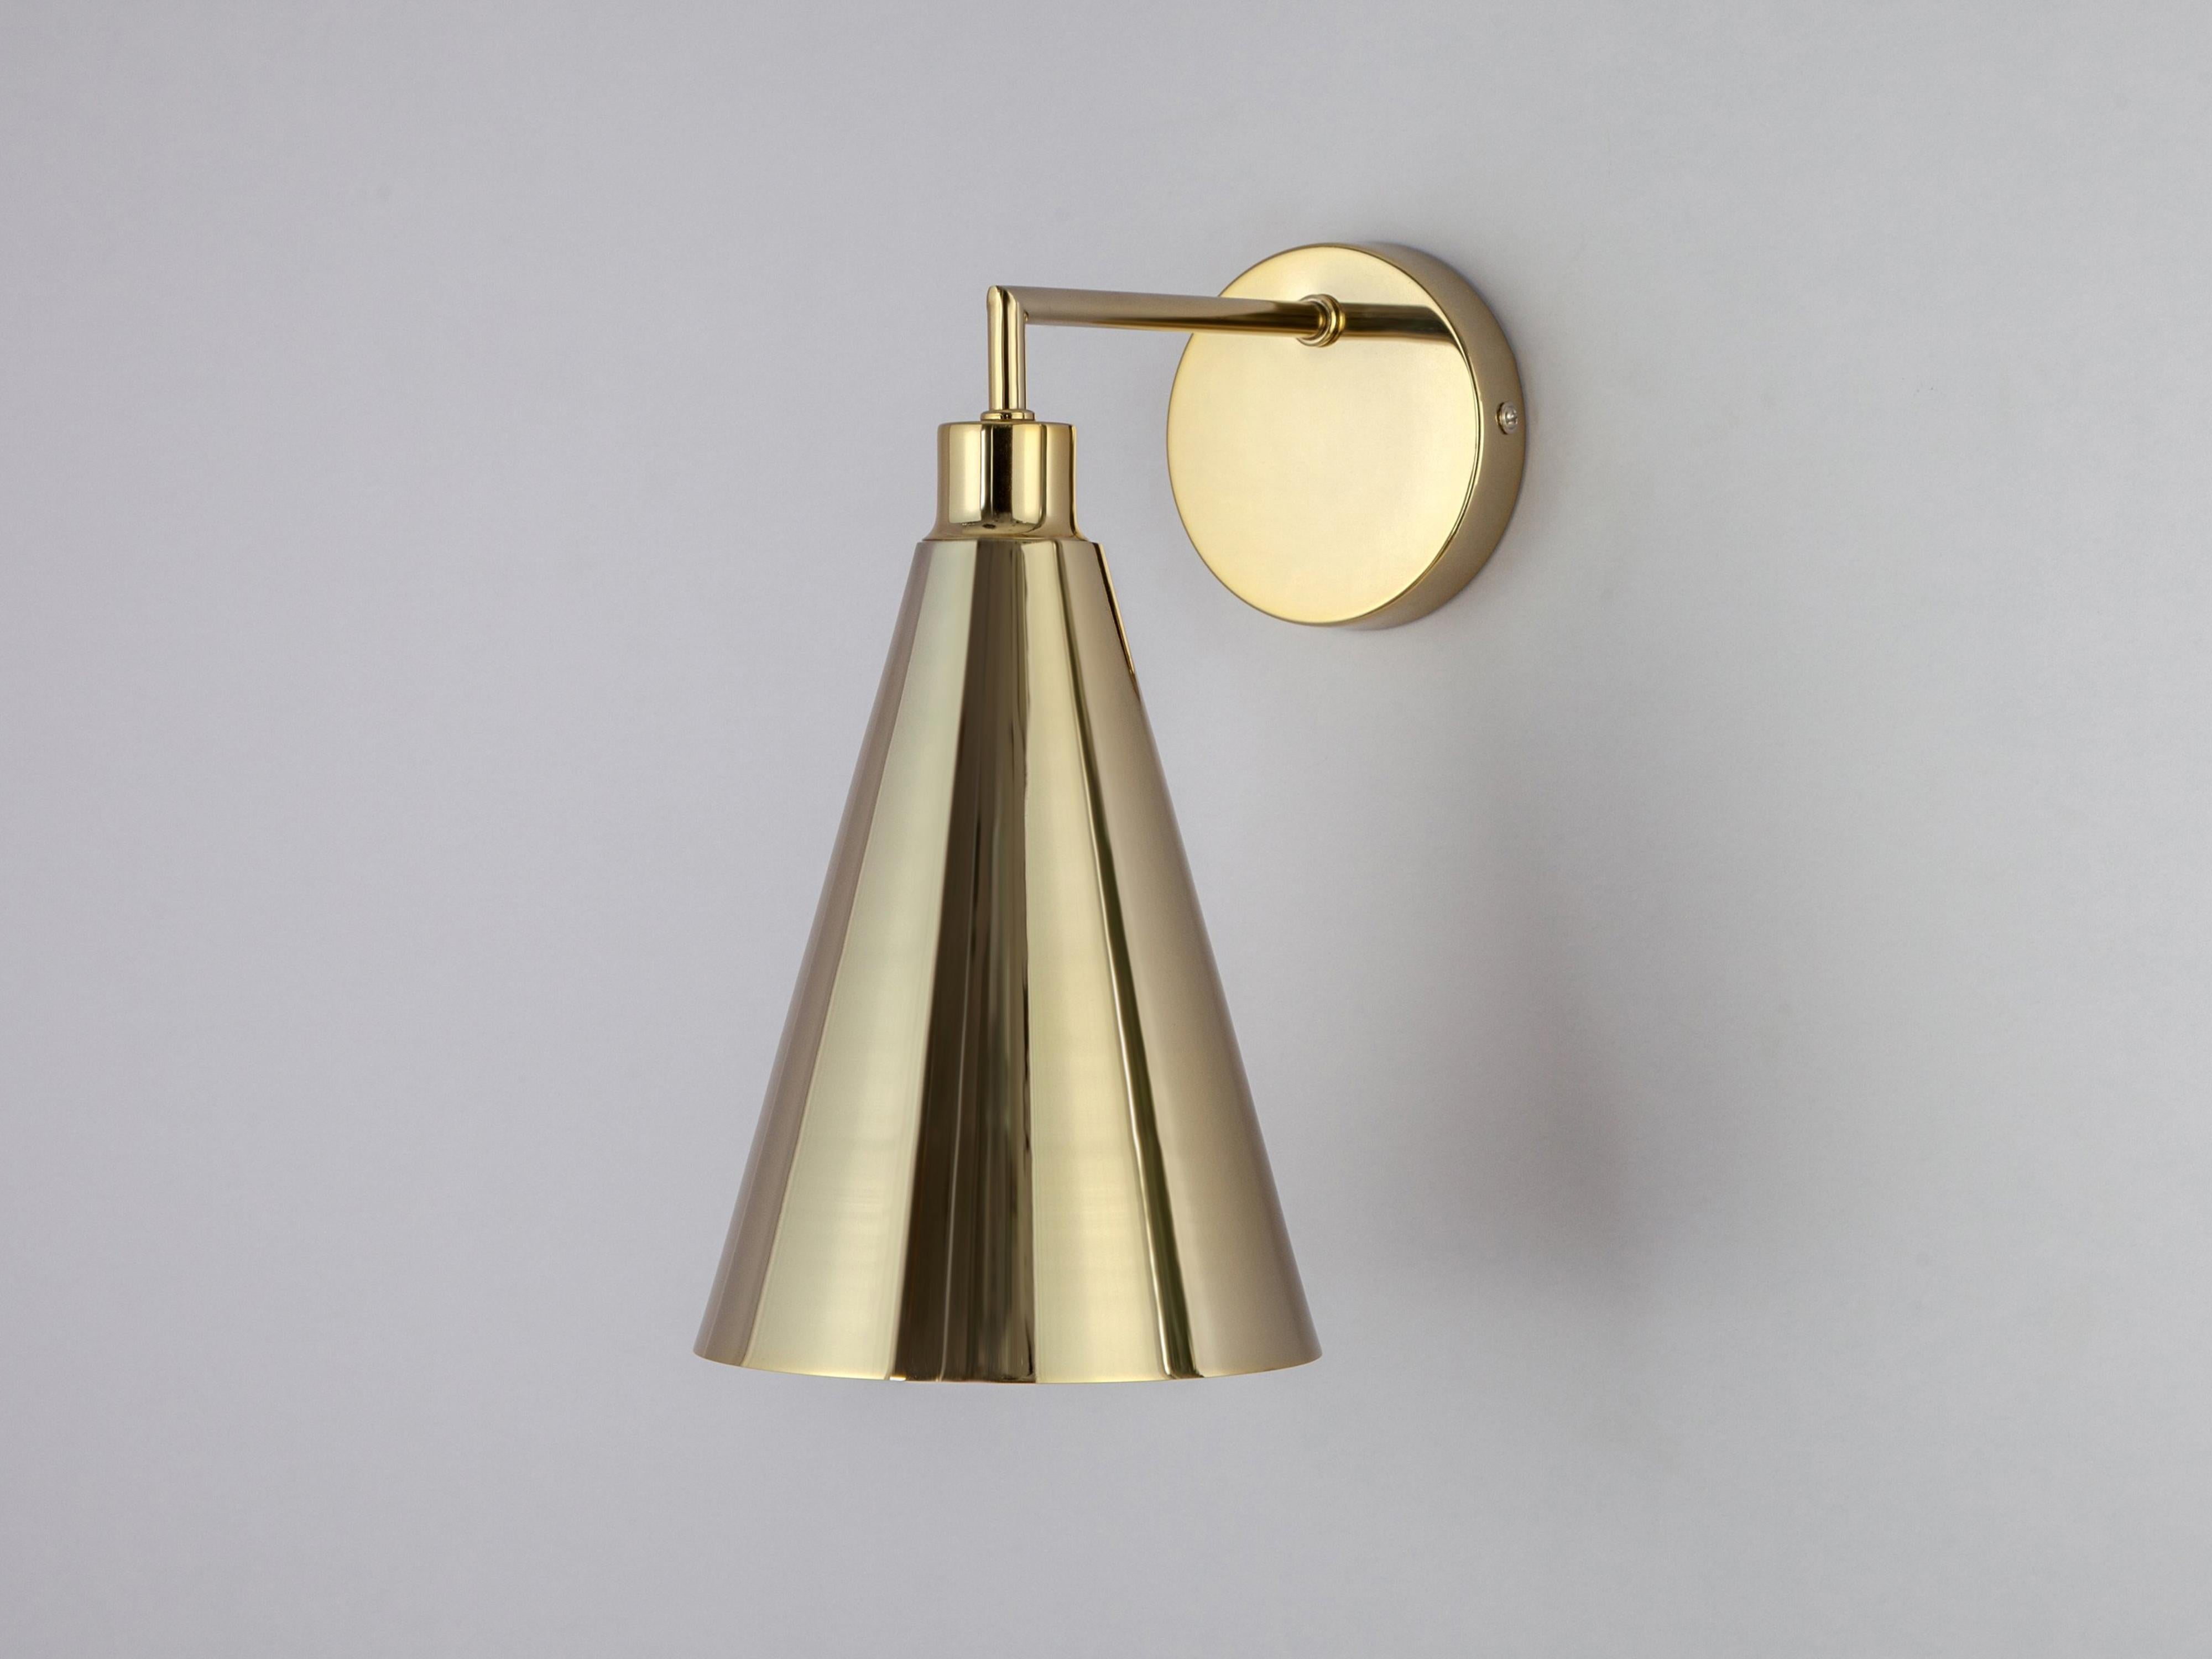 This sleek and practical wall sconce fuses traditional and contemporary. The stem base suspends an oversized cone shade which casts a wide atmospheric glow. Ideal for a living space or bedside light. Brass brings depth and opulence to your interior